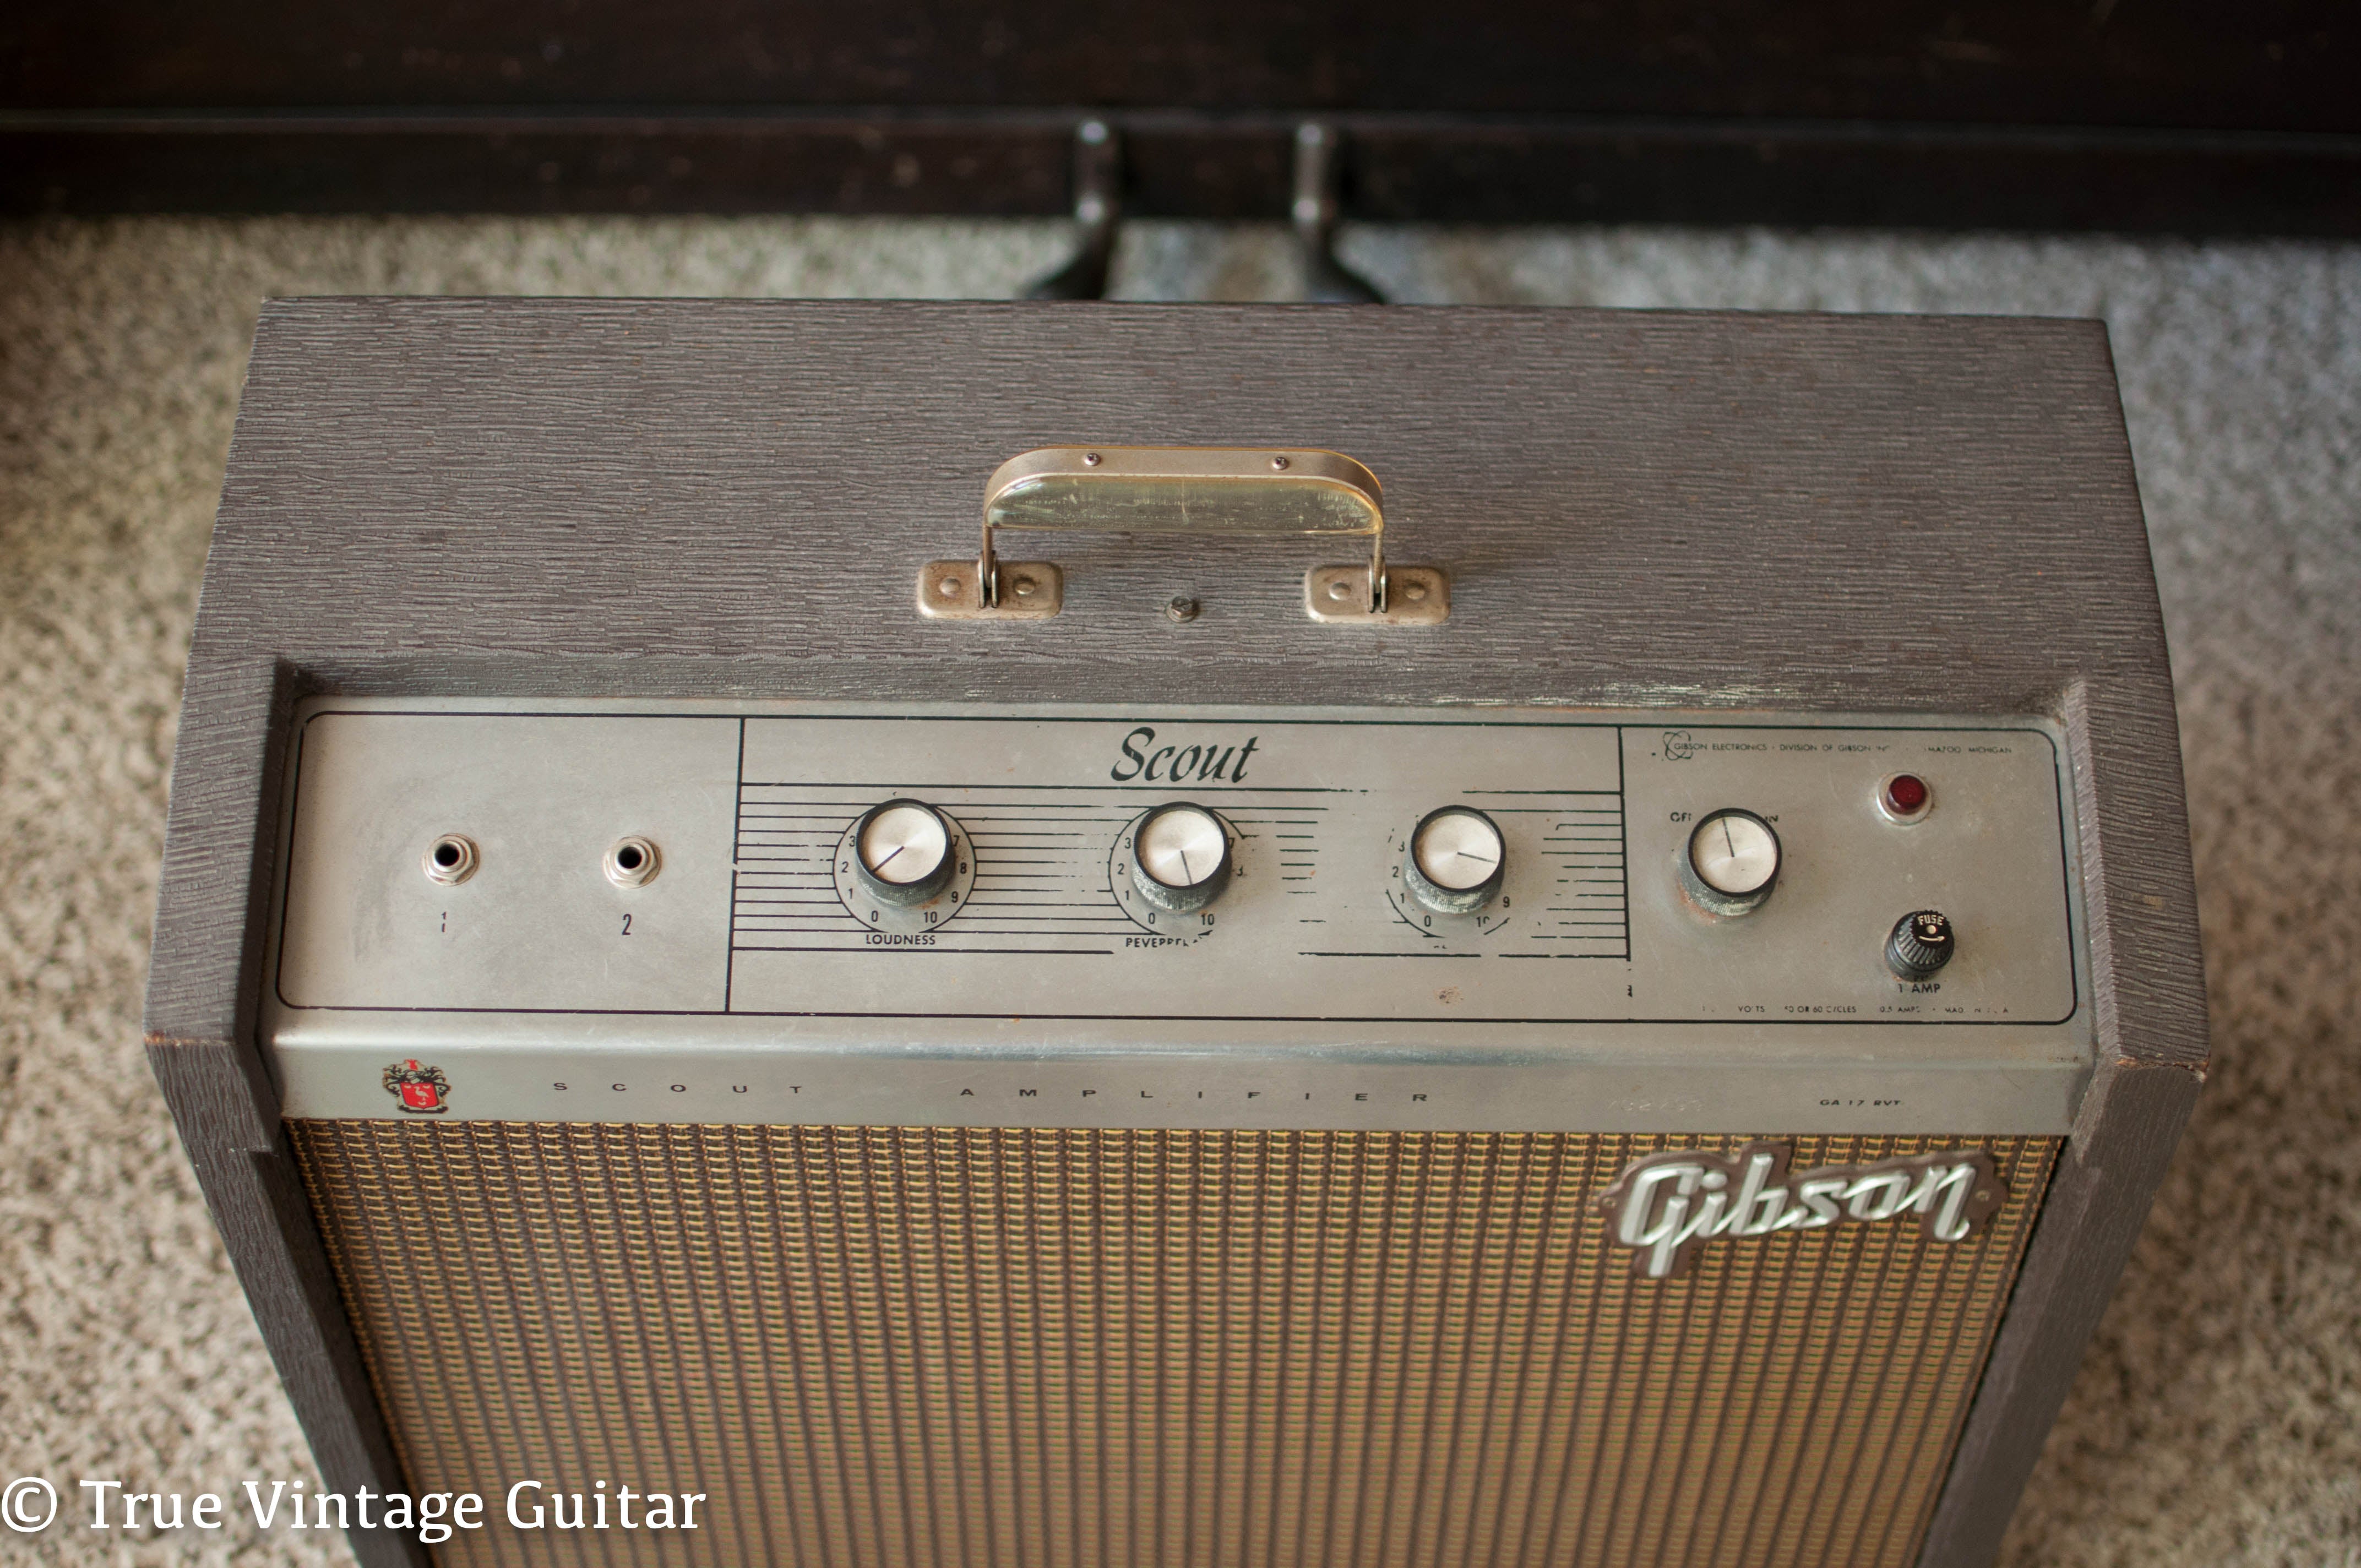 Vintage 1964 Gibson guitar amp Scout